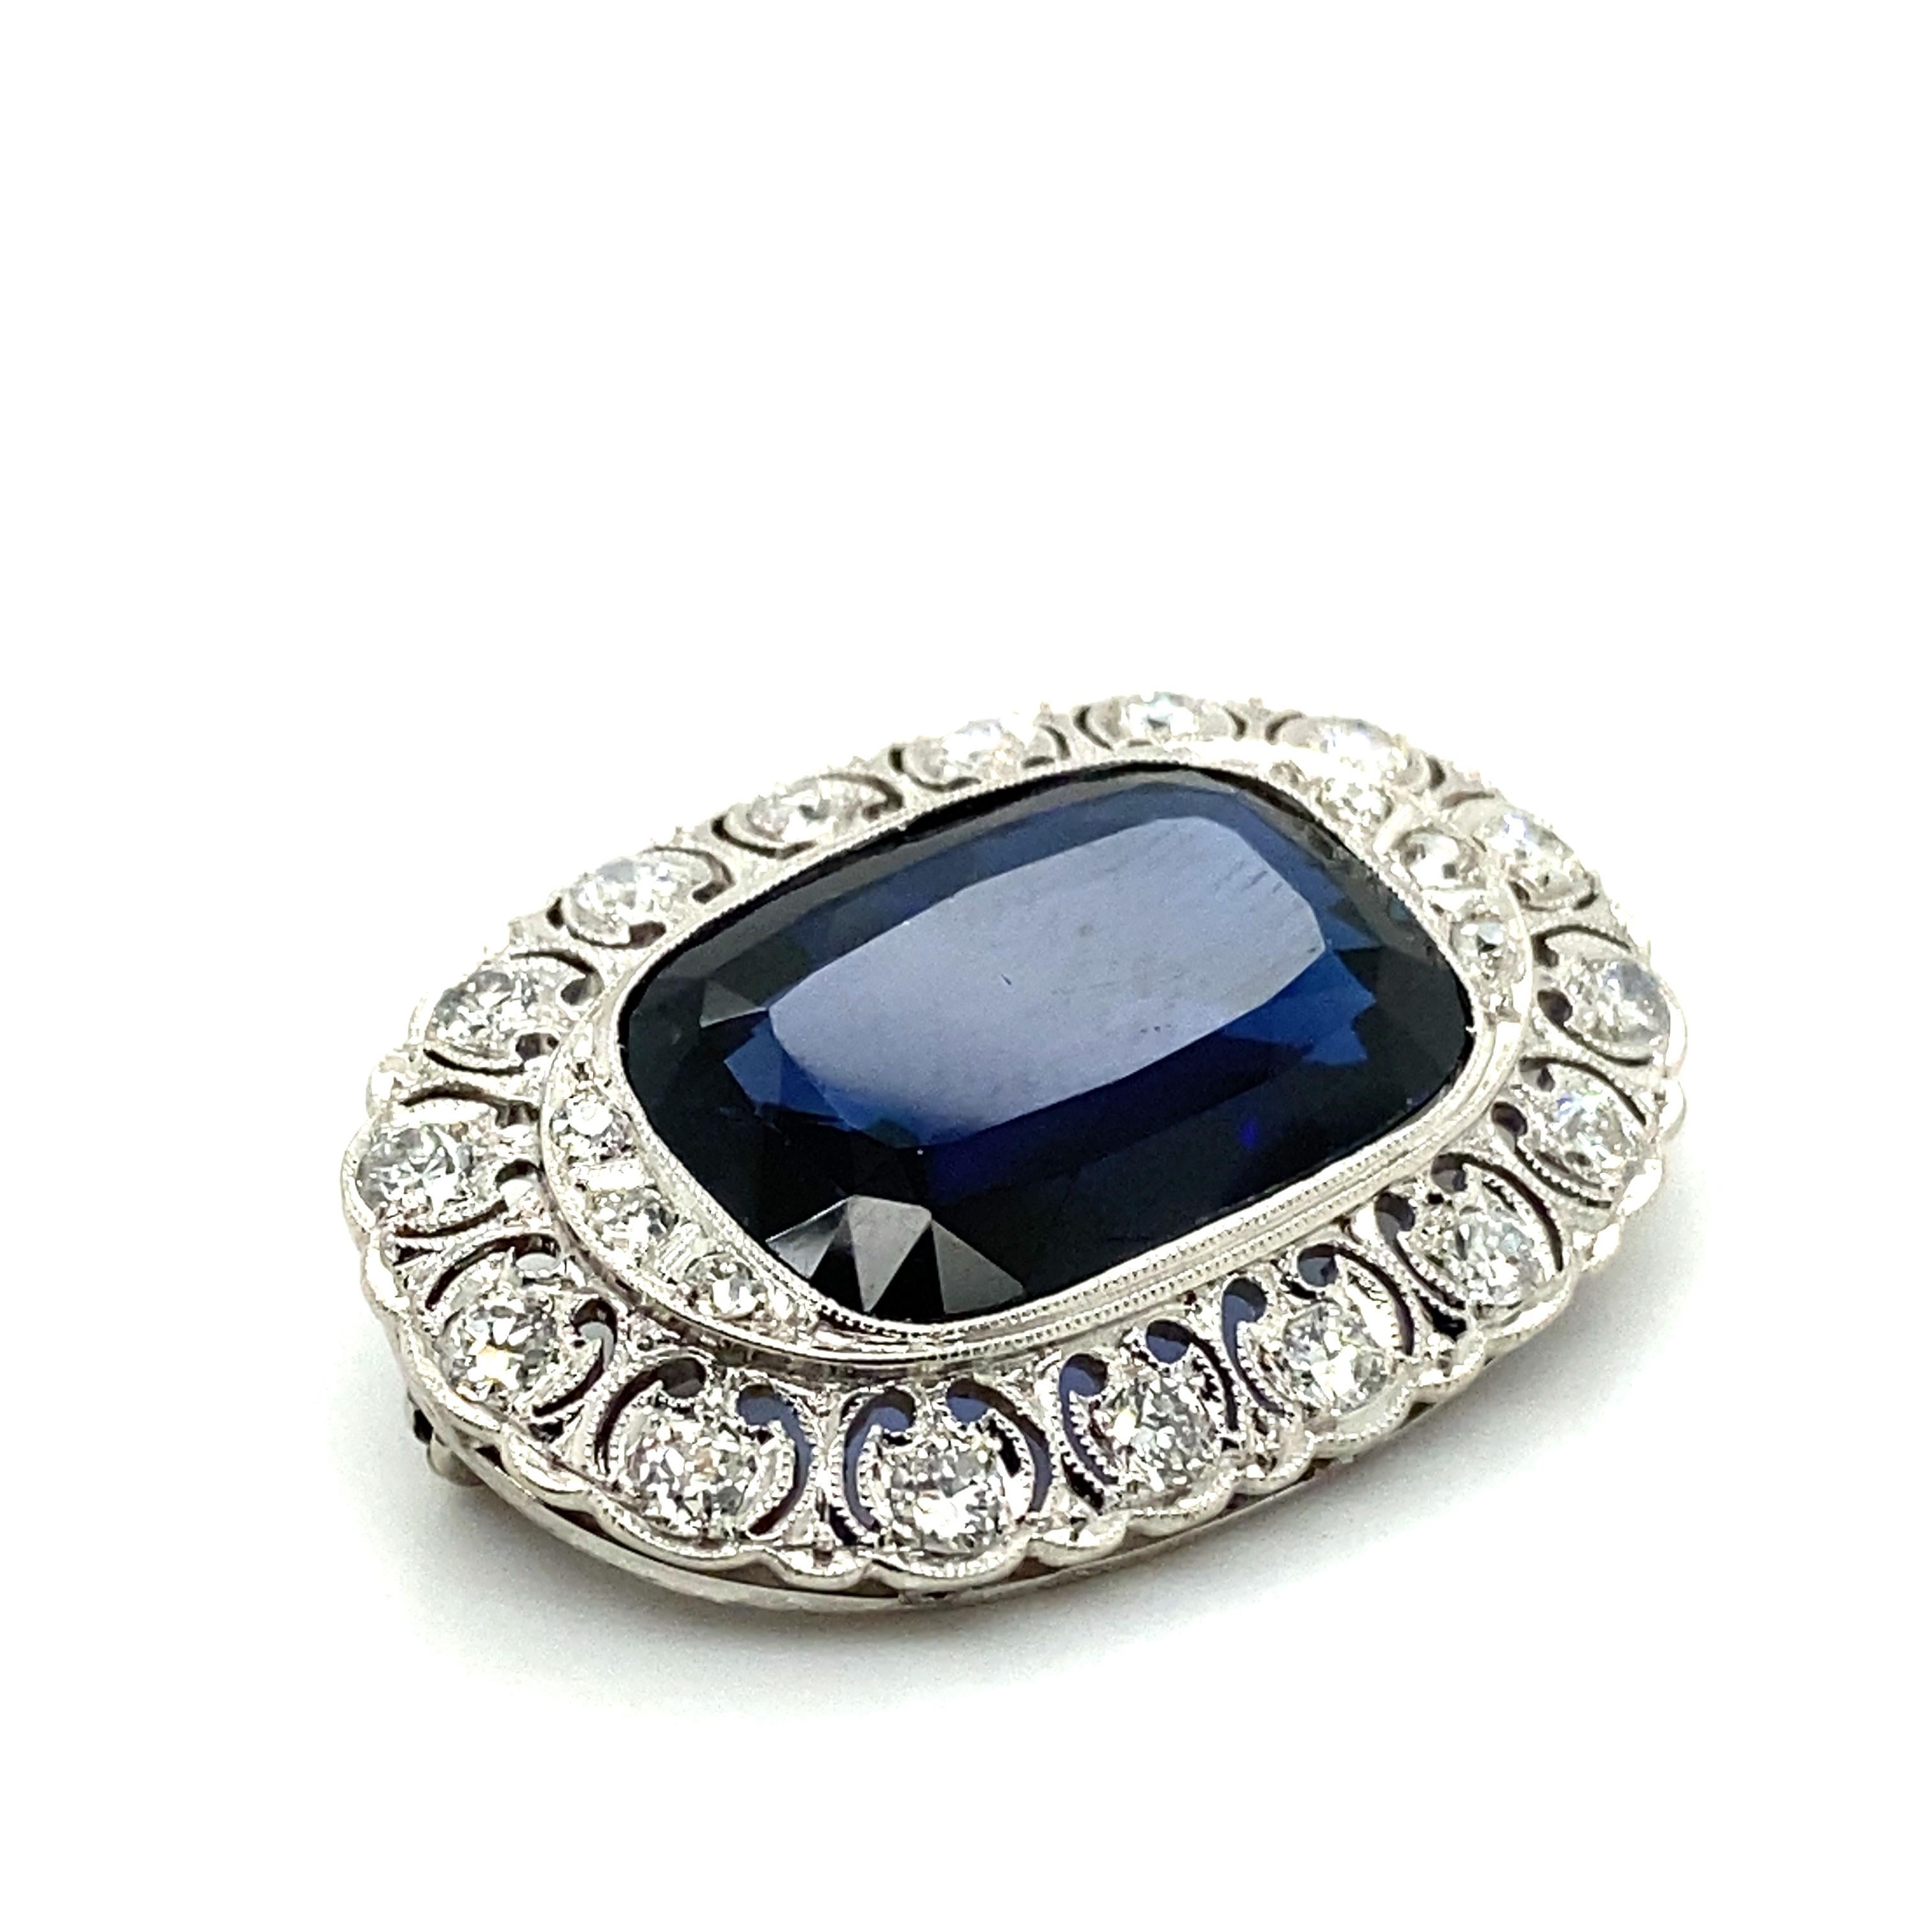 Women's or Men's Diamond and Synthetic Sapphire Brooch in 14 Karat White Gold